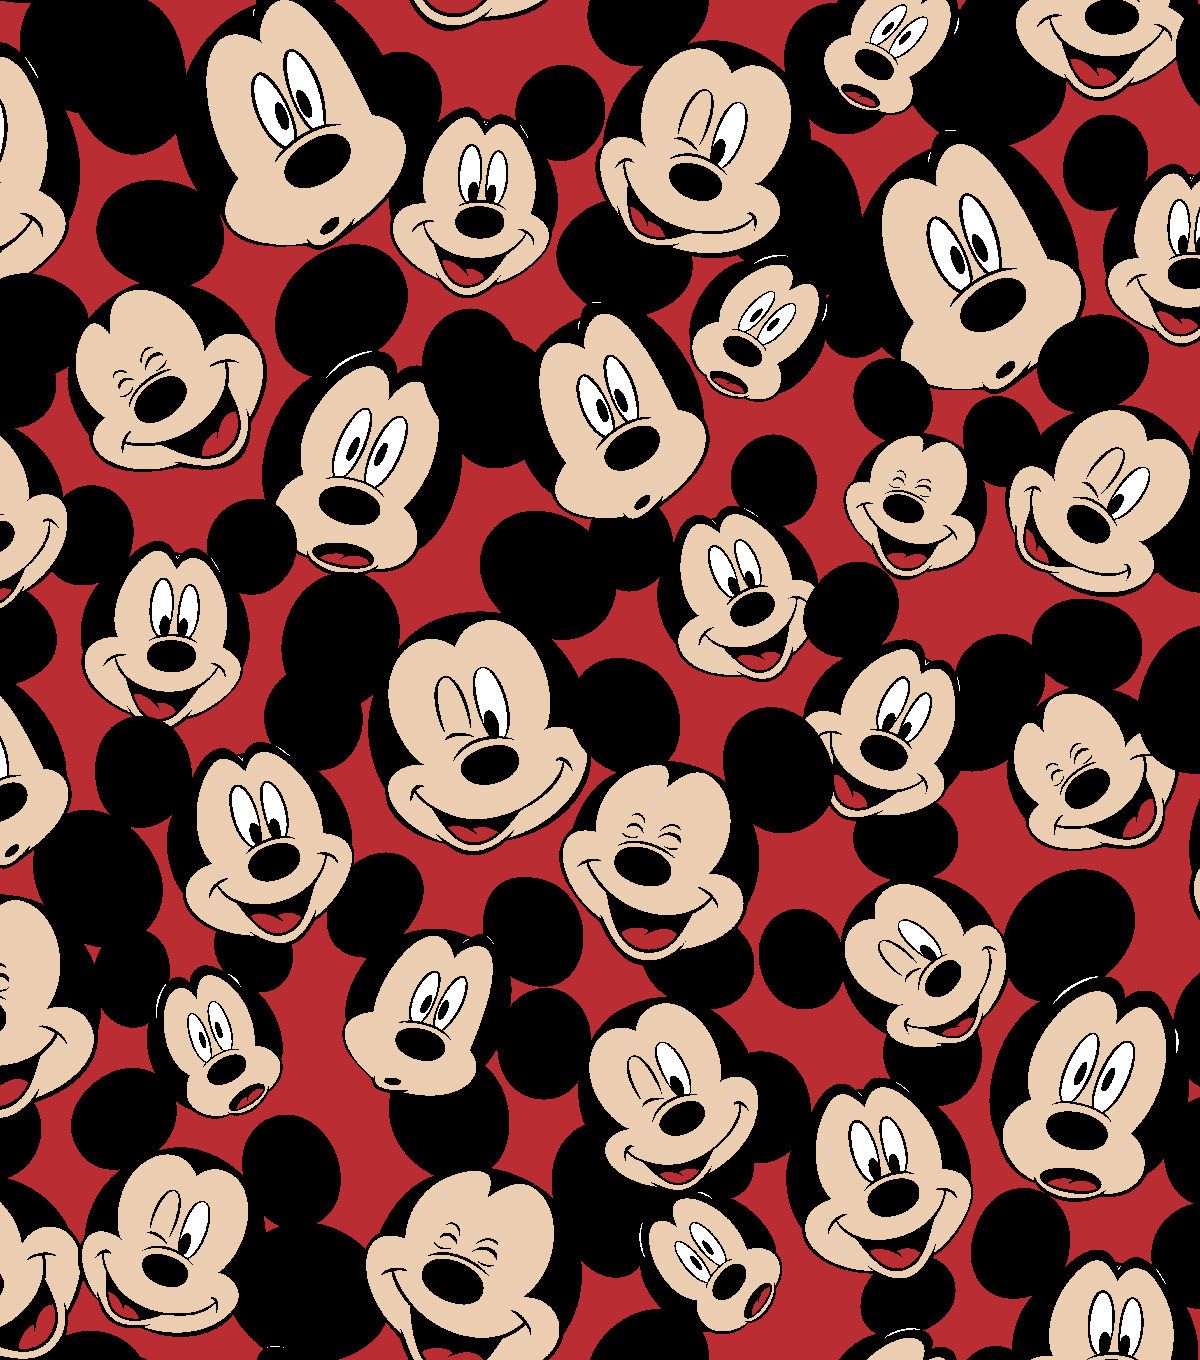 Disney Mickey Mouse Fleece Fabric 59'' Tossed Mickey Heads. JOANN. Mickey mouse wallpaper iphone, Mickey mouse wallpaper, Mickey mouse background